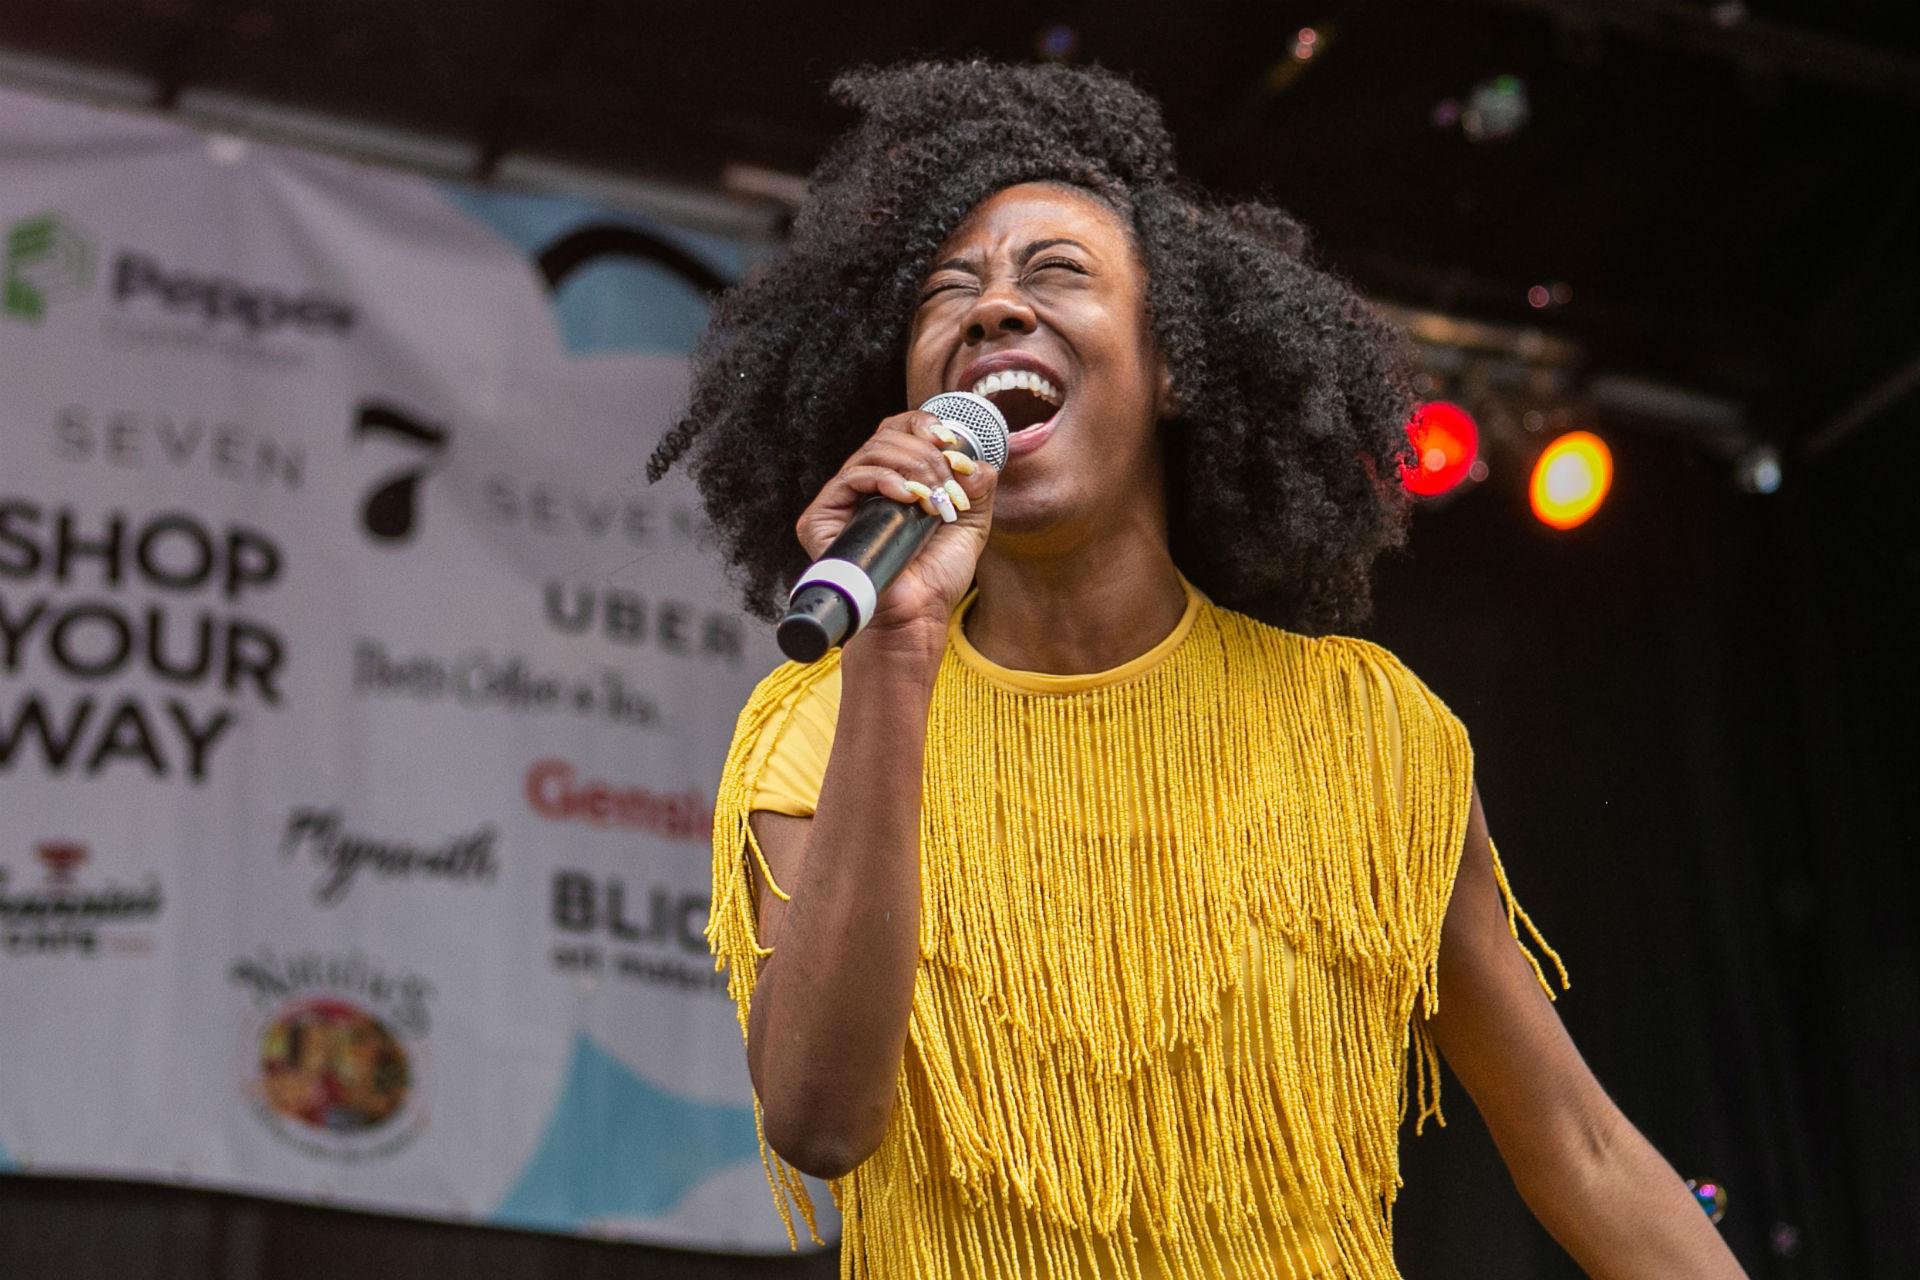 Manifest 2018 song competition winner Chinaa performs. (Photo by Alexis Ellers, Columbia College Chicago)